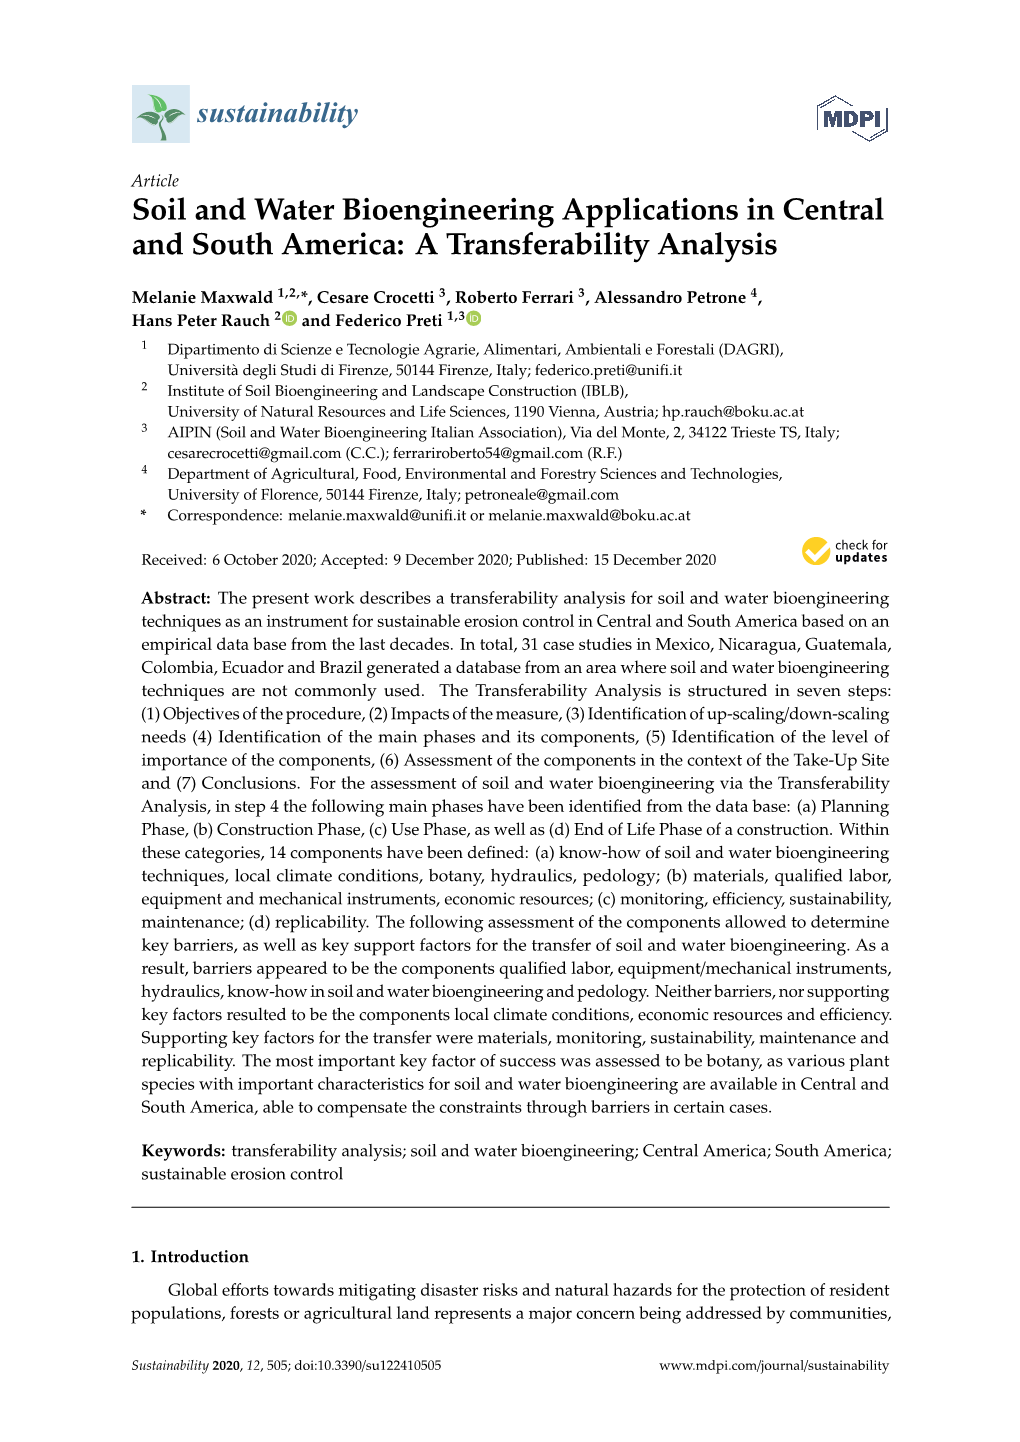 Soil and Water Bioengineering Applications in Central and South America: a Transferability Analysis